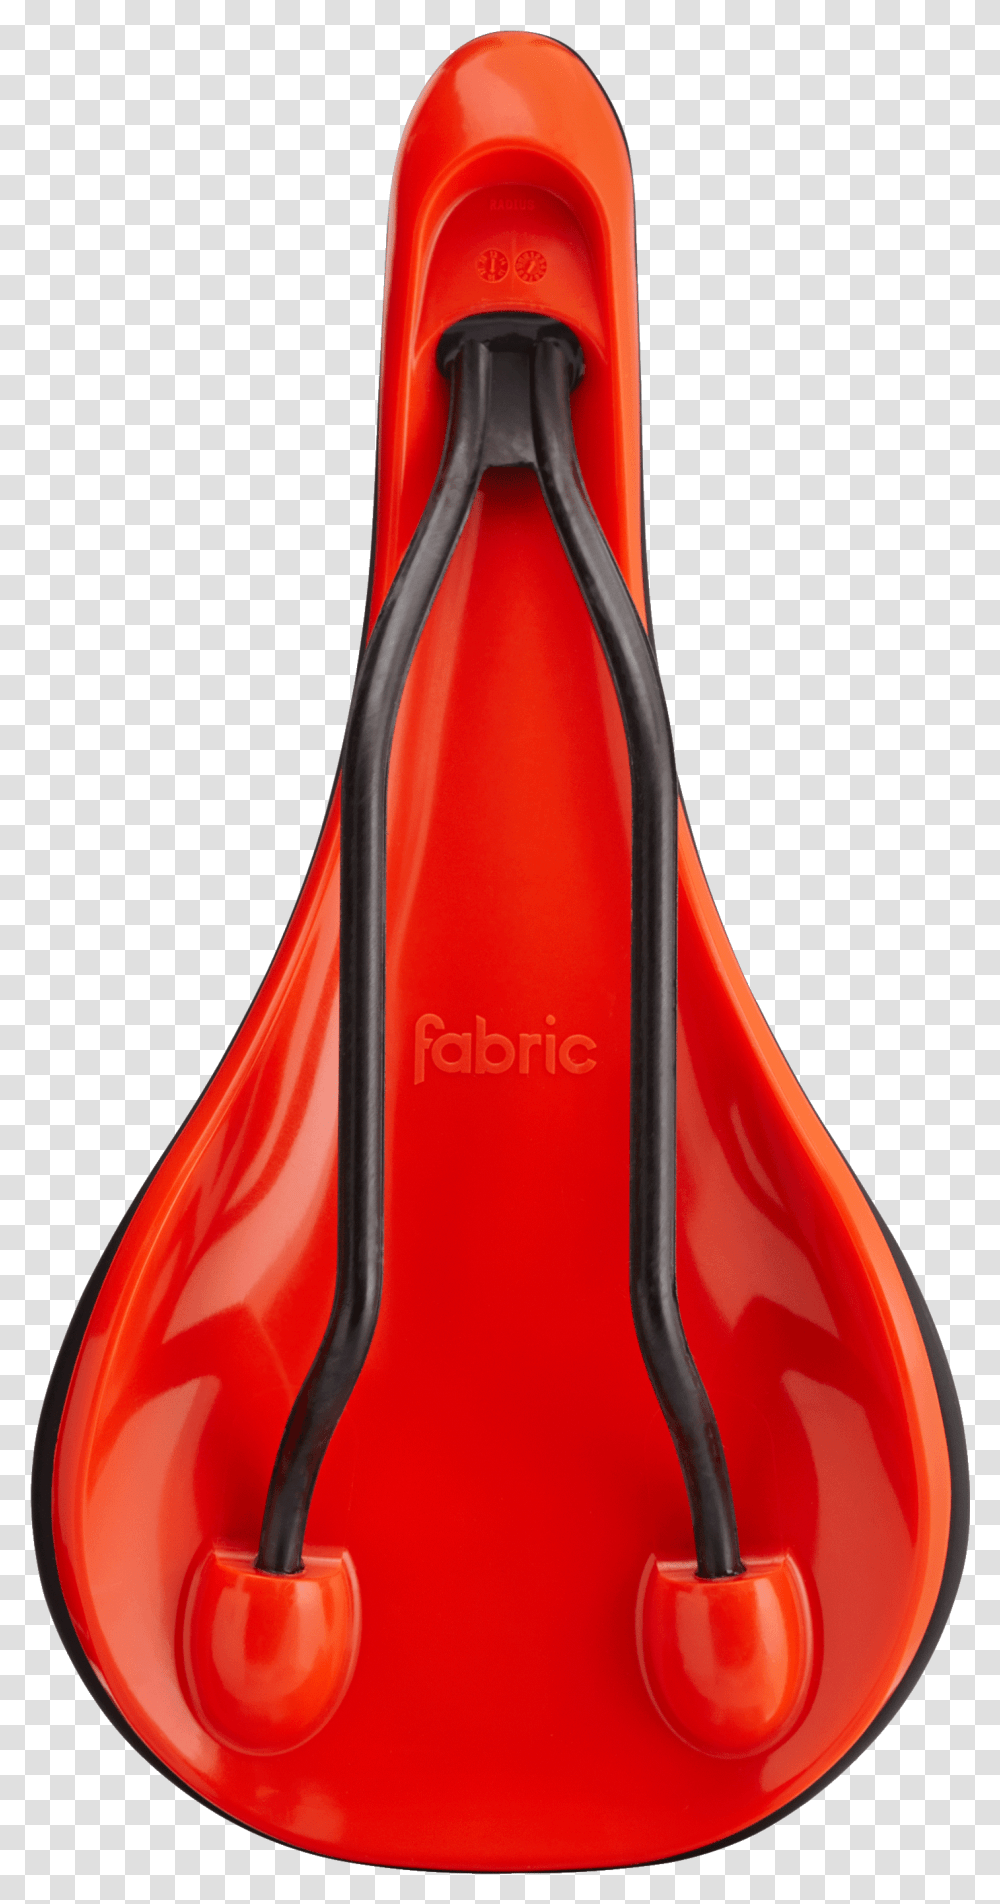 Fabric Scoop Radius Pro Red, Bottle, Beverage, Drink, Alcohol Transparent Png